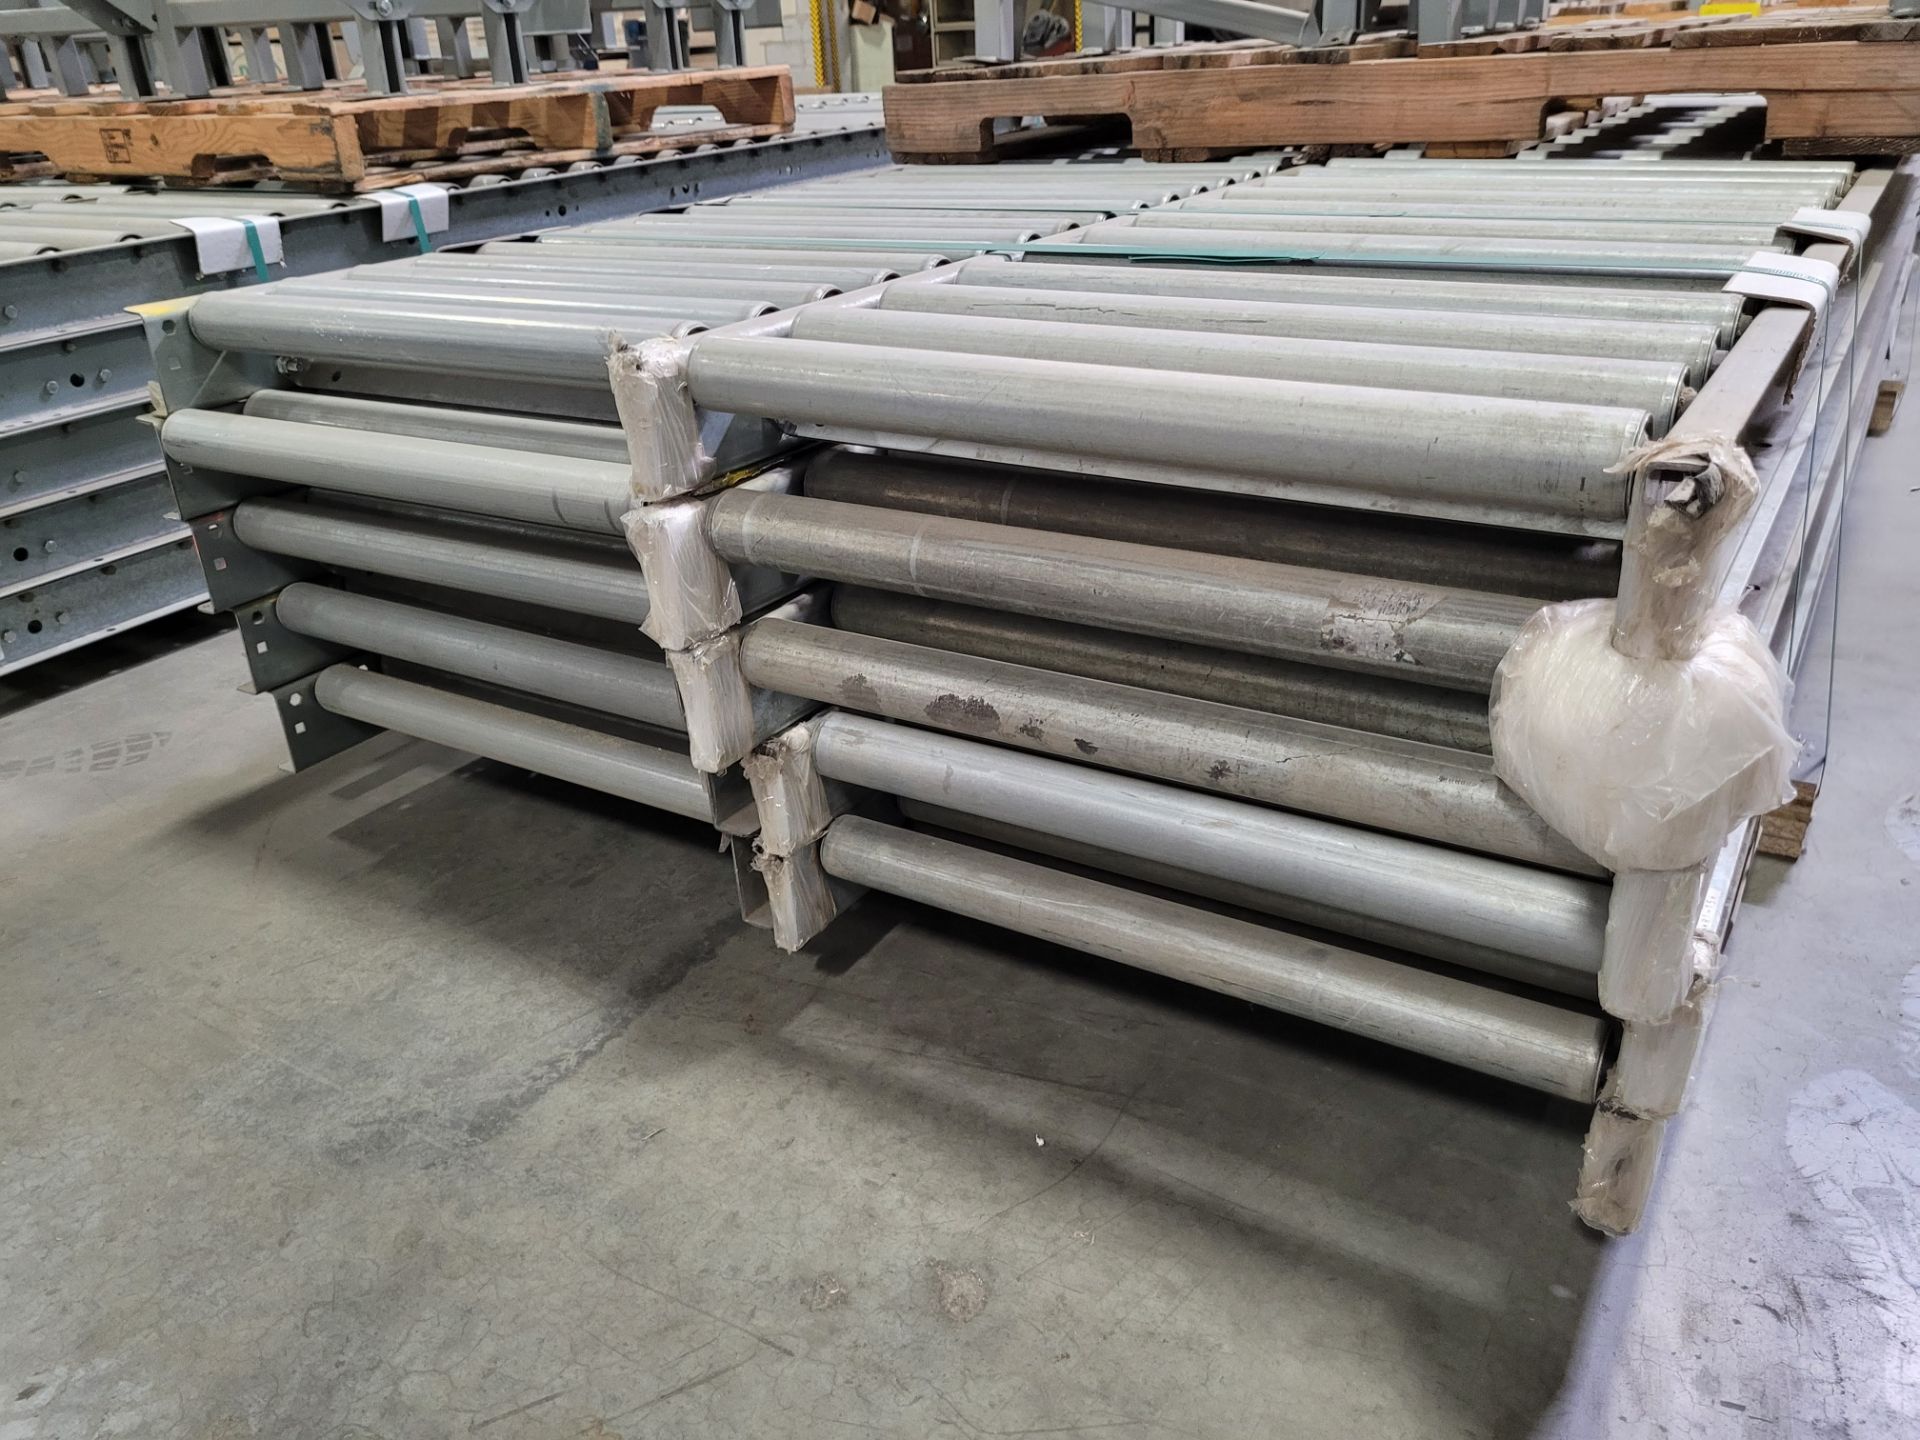 LOT - (10) 120"L X 24"W ROLLER TOP CONVEYORS W/ (10) STANDS - Image 2 of 2